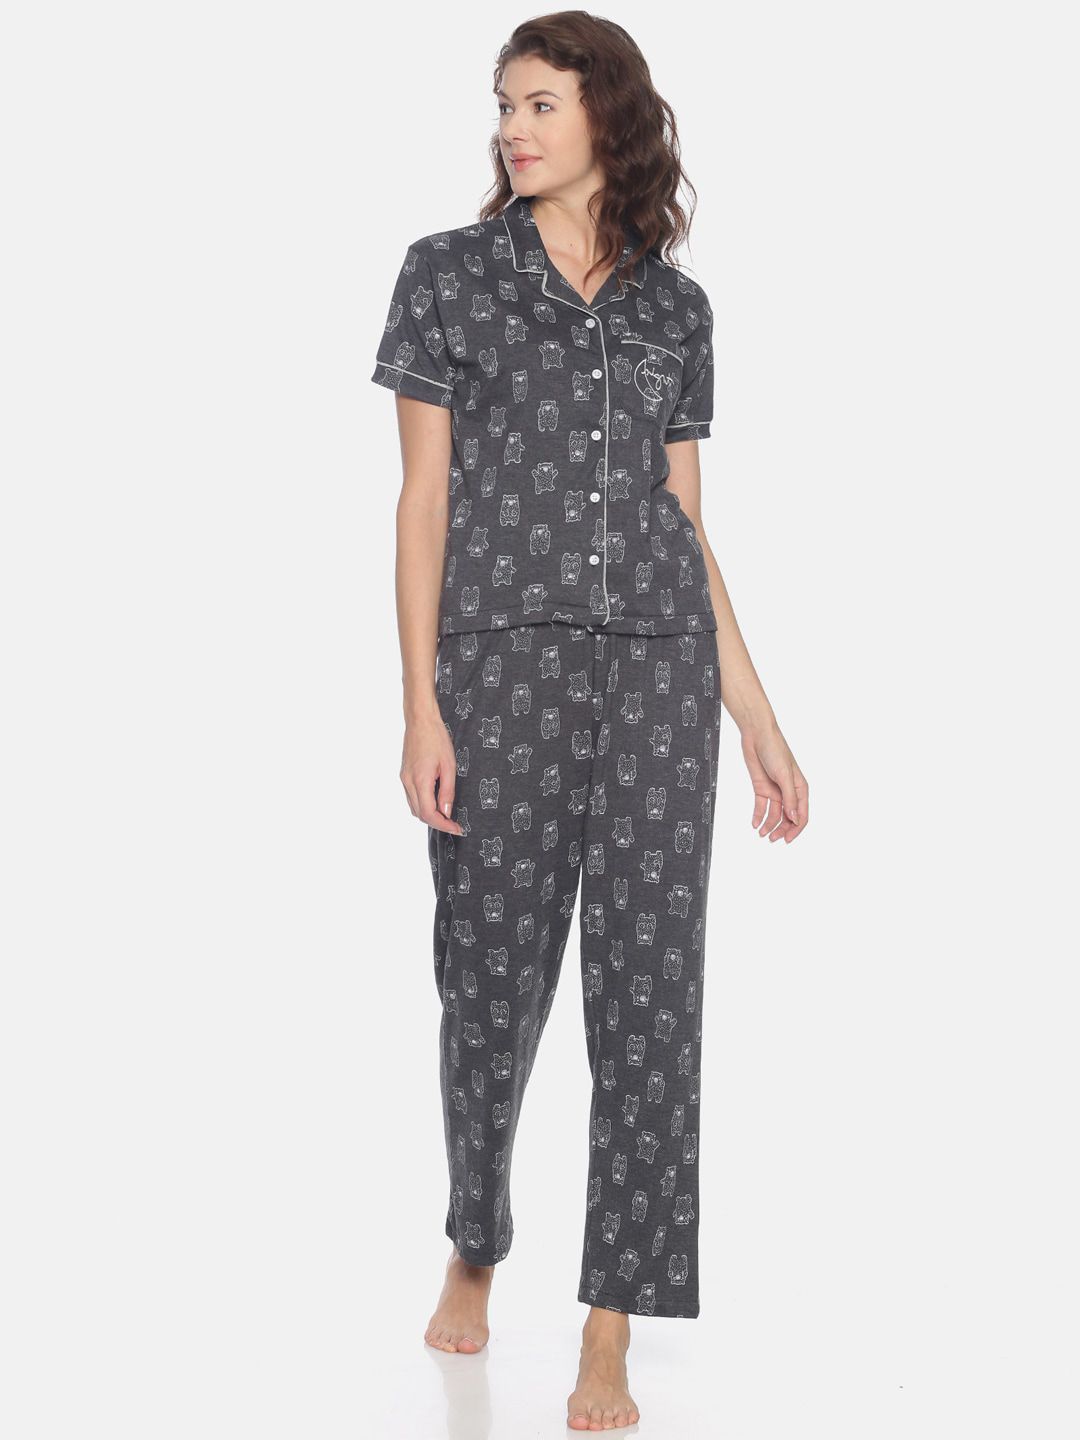 Campus Sutra Women Charcoal Grey Printed Night suit Price in India